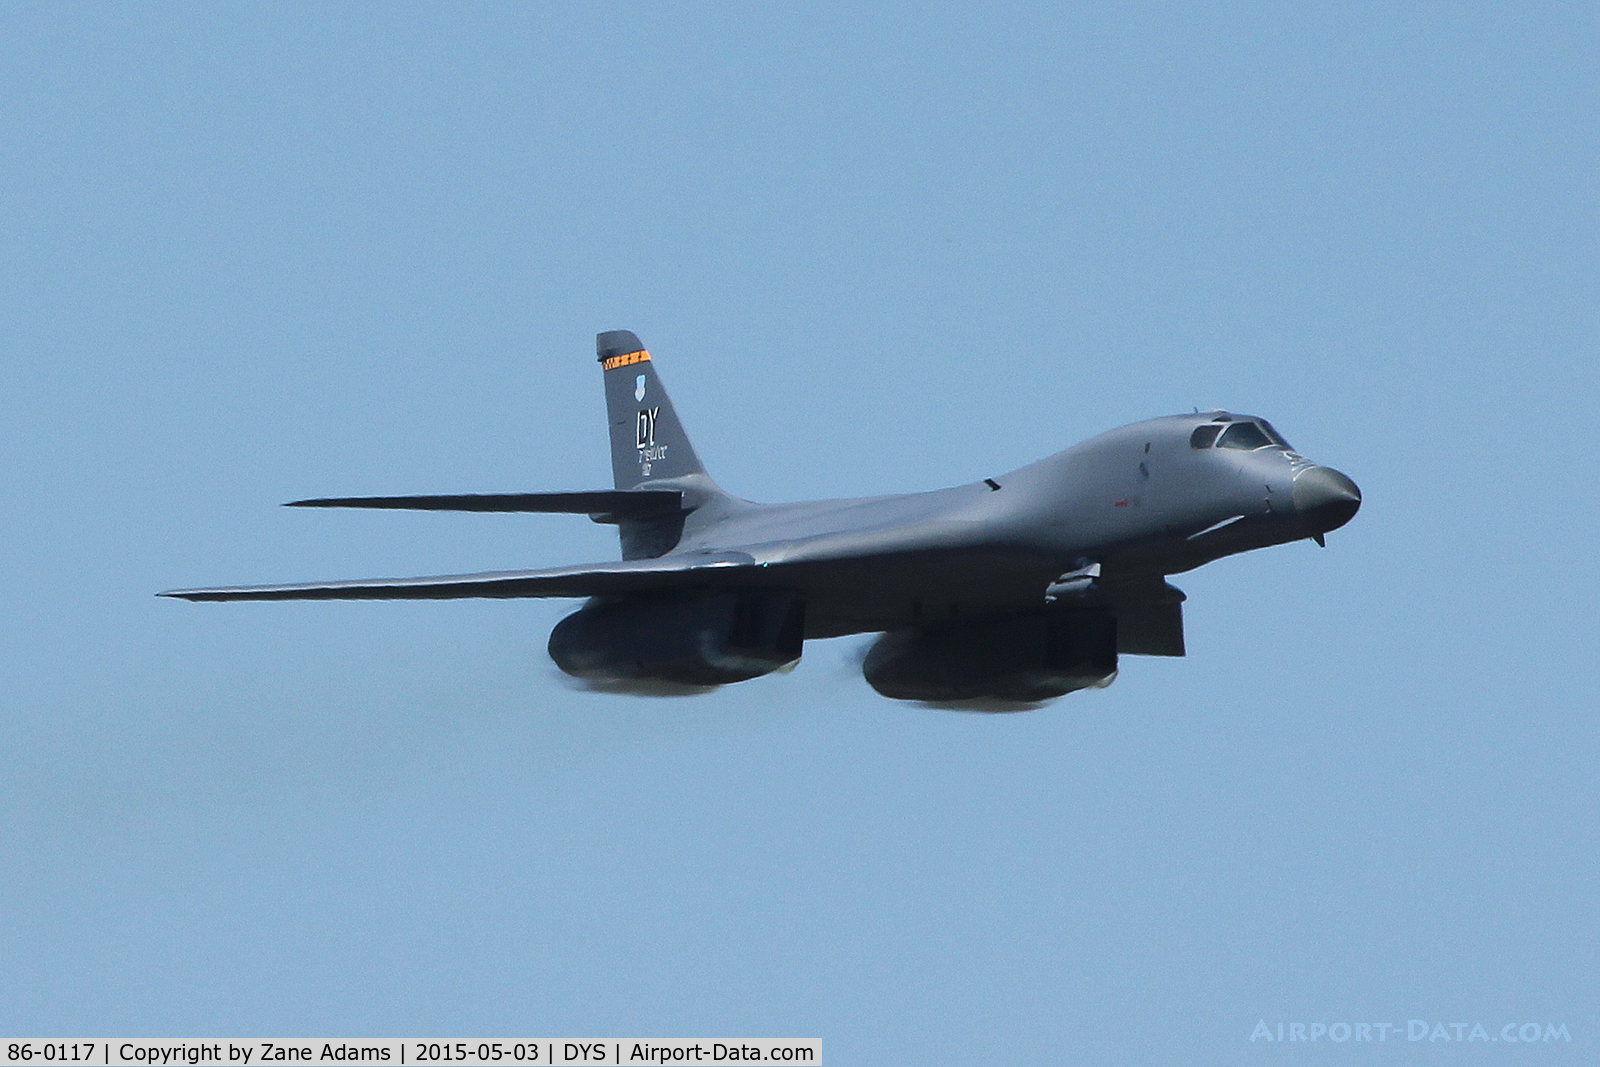 86-0117, 1986 Rockwell B-1B Lancer C/N 77, At the 2014 Big Country Airshow - Dyess AFB, TX